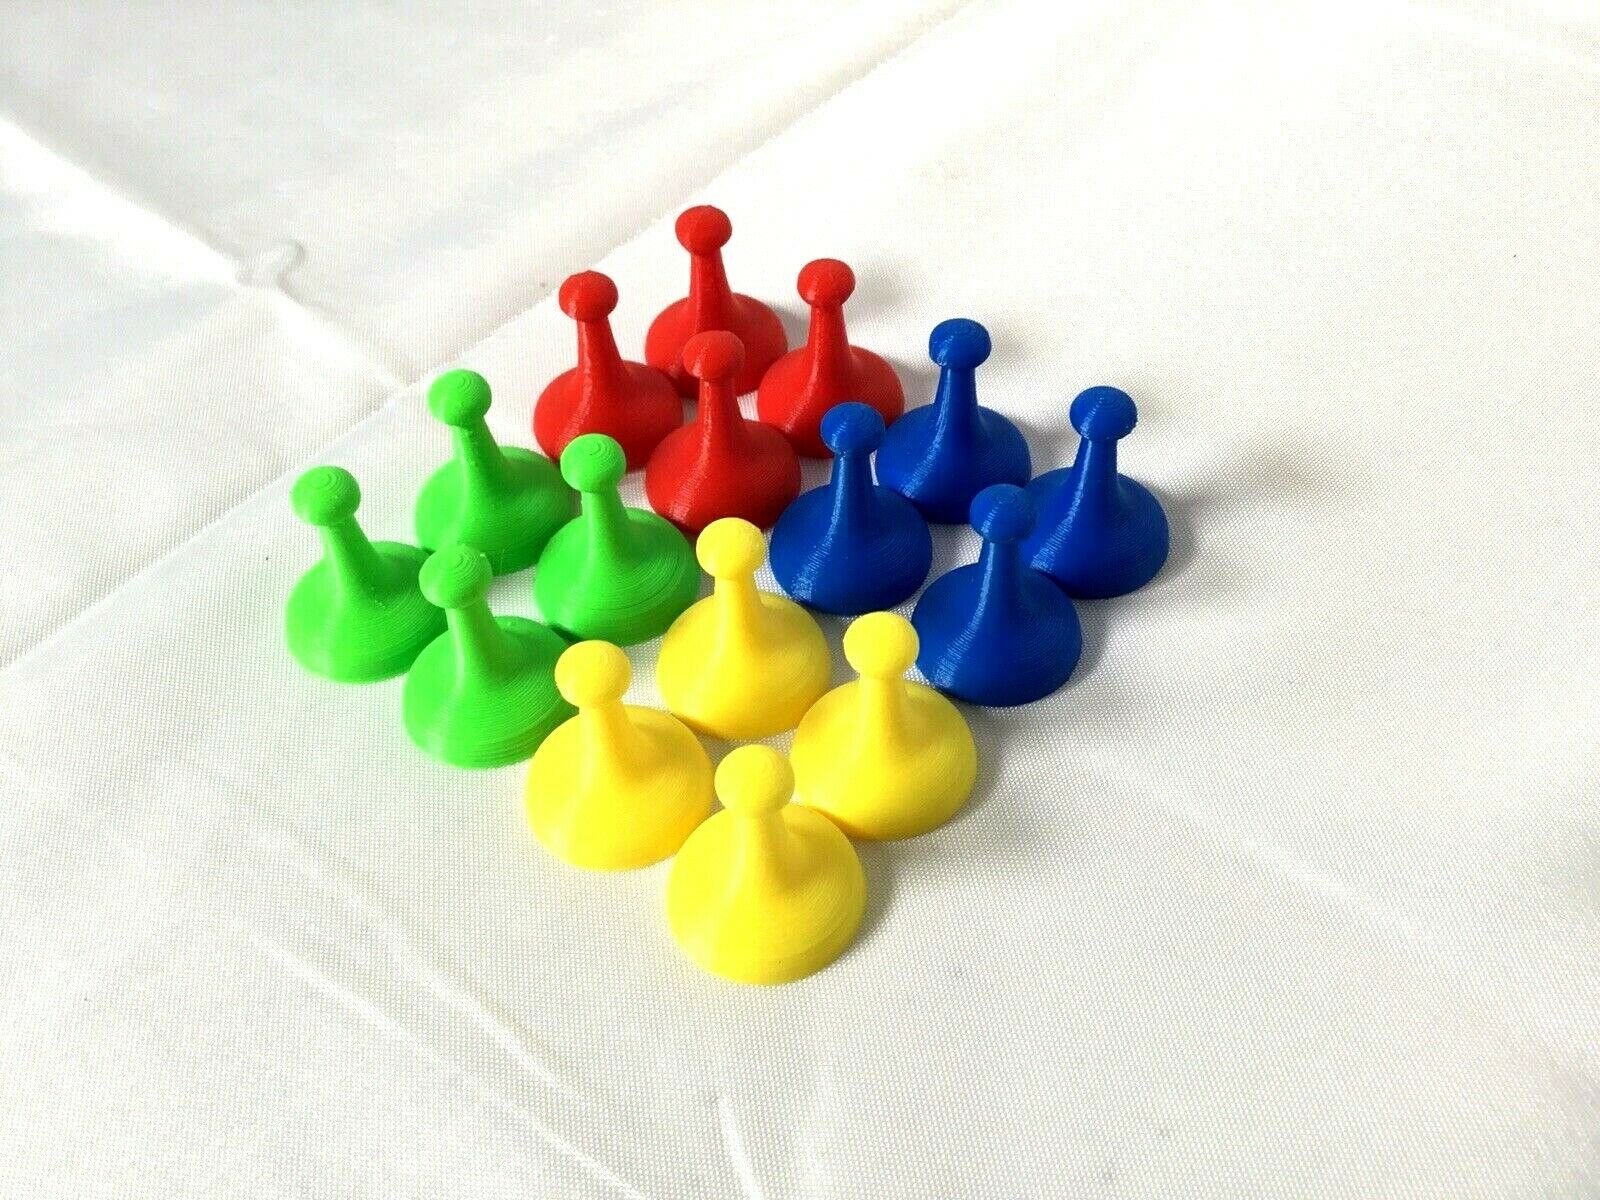 Sorry Board Game Replacement Pieces Parts Pawns Movers 16 Red Green Blue Yellow So Sick With It